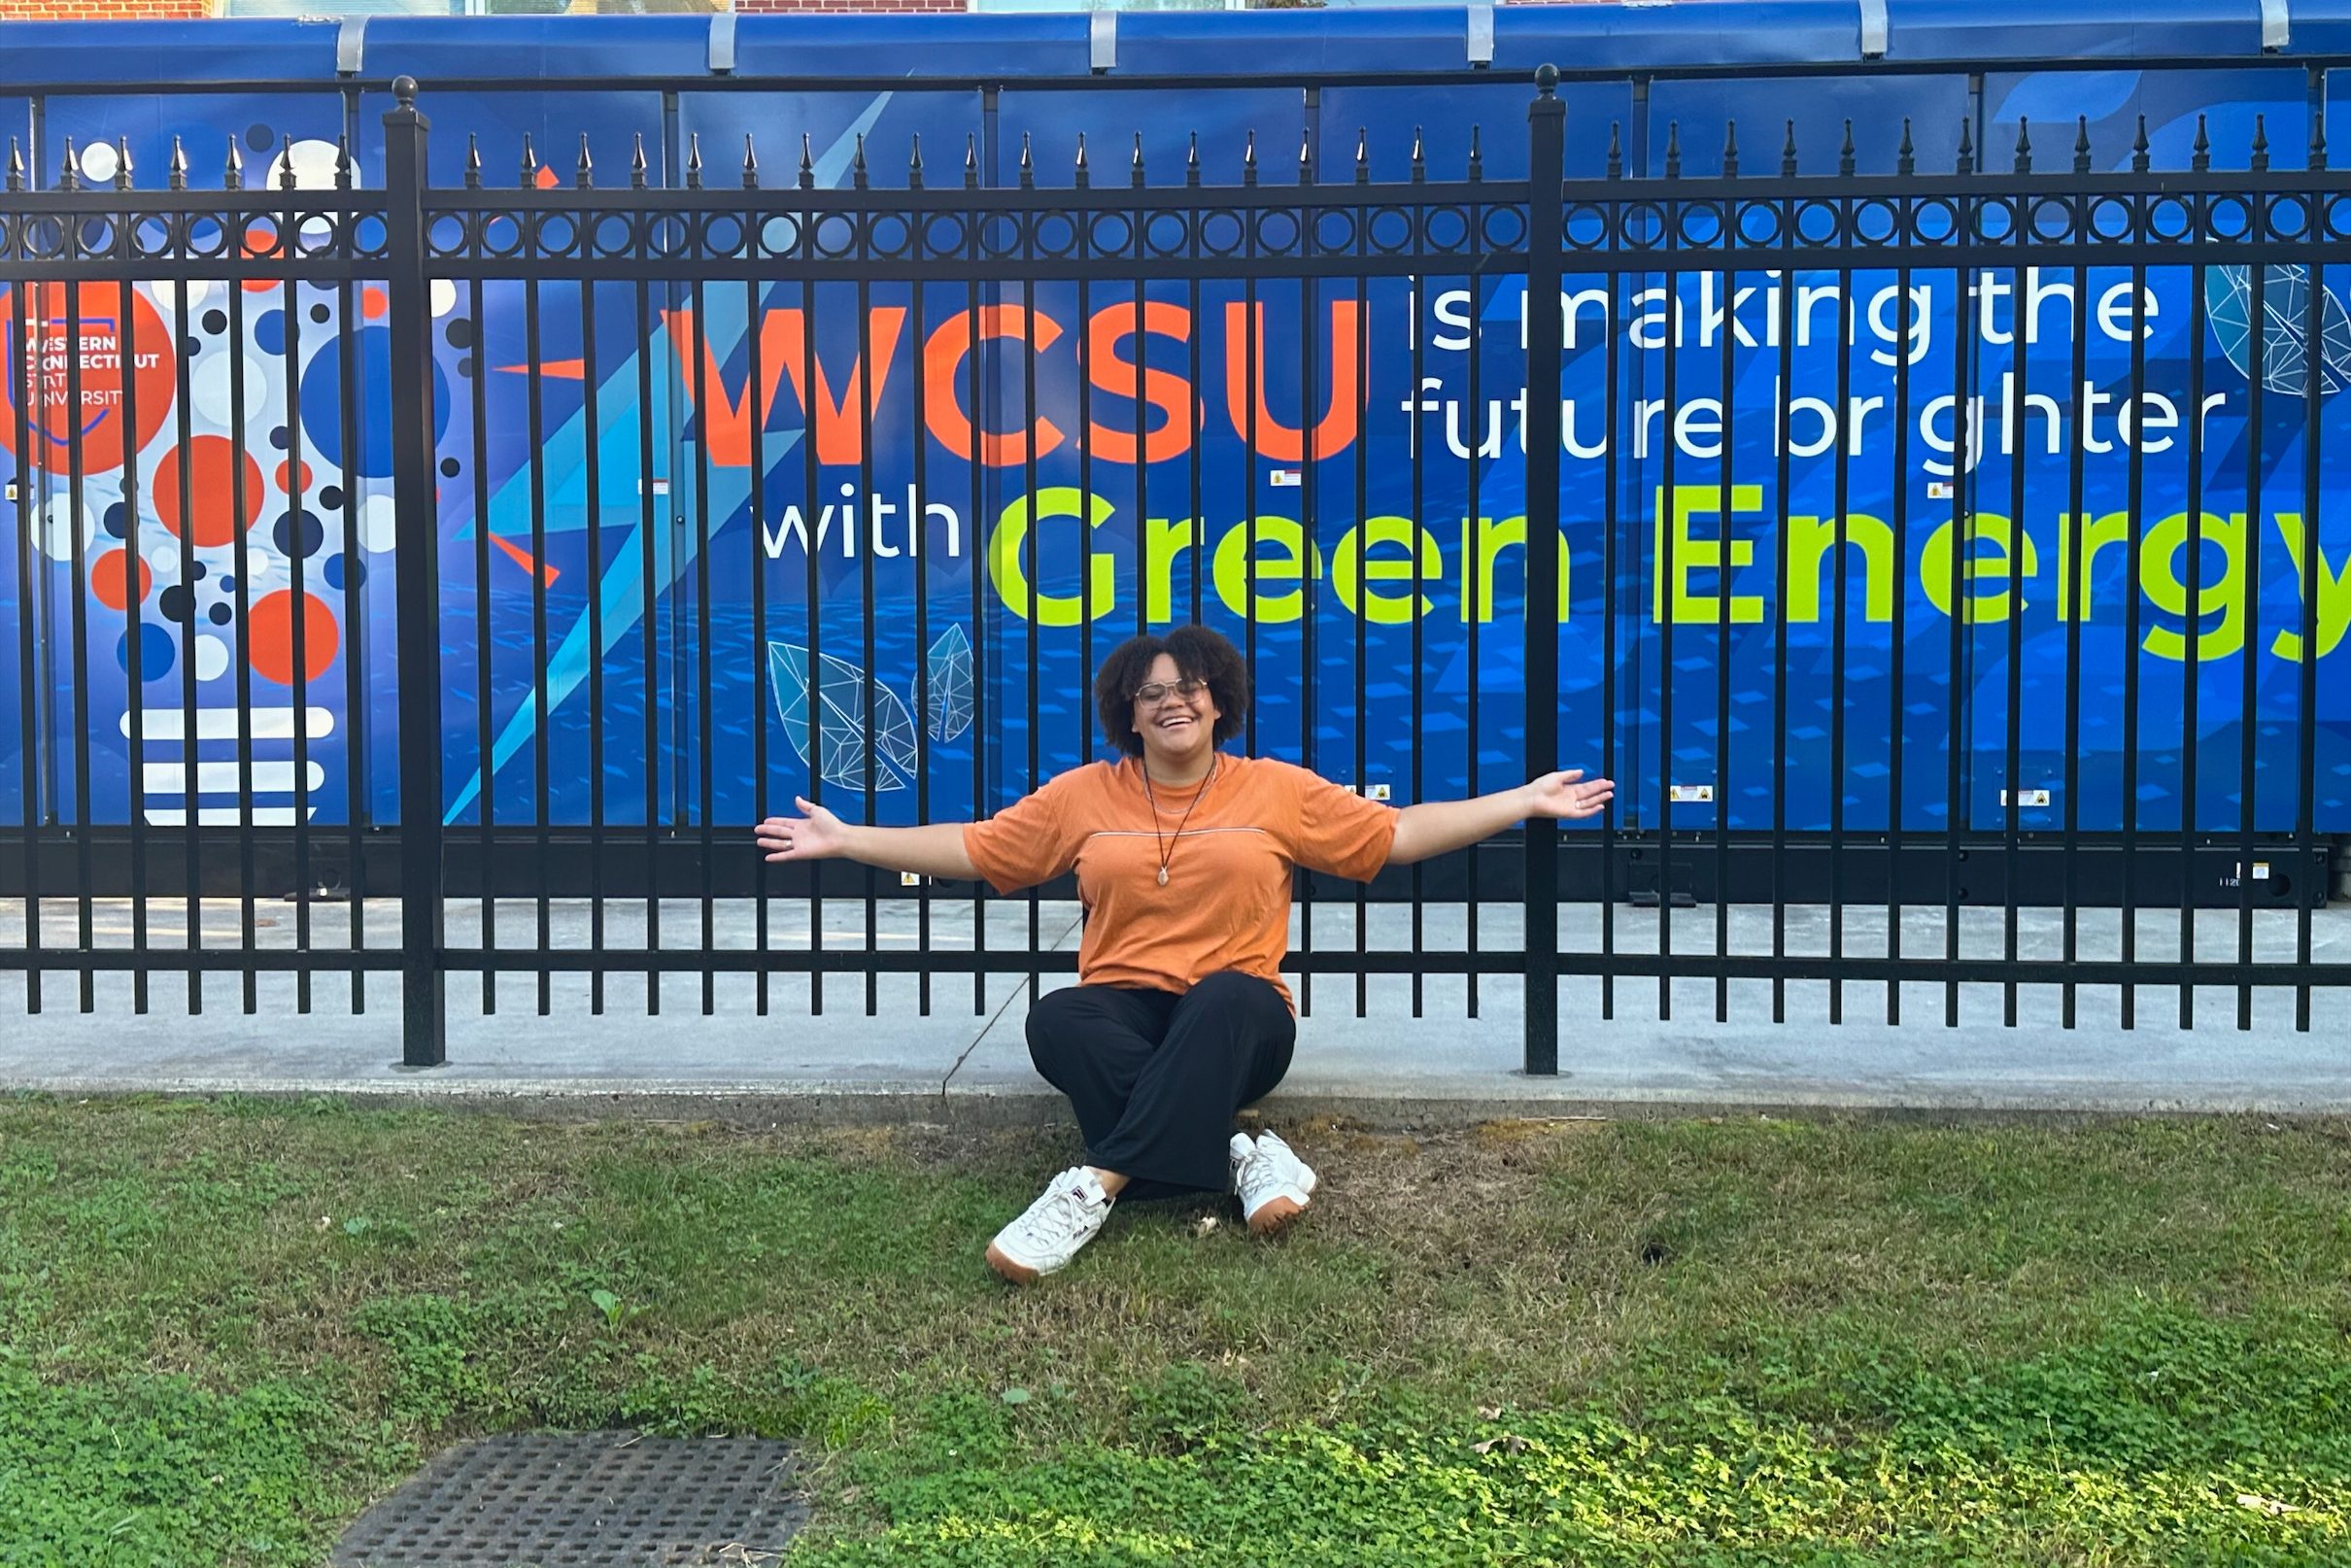 Denise Sweeney in an orange shirt and black pants with arms stretched out sitting infront of a black metal fence in front of a fuel cell generator that reads "WCSU is making the future brighter with green energy" on a blue background with a lightblub graphic and the WCSU logo